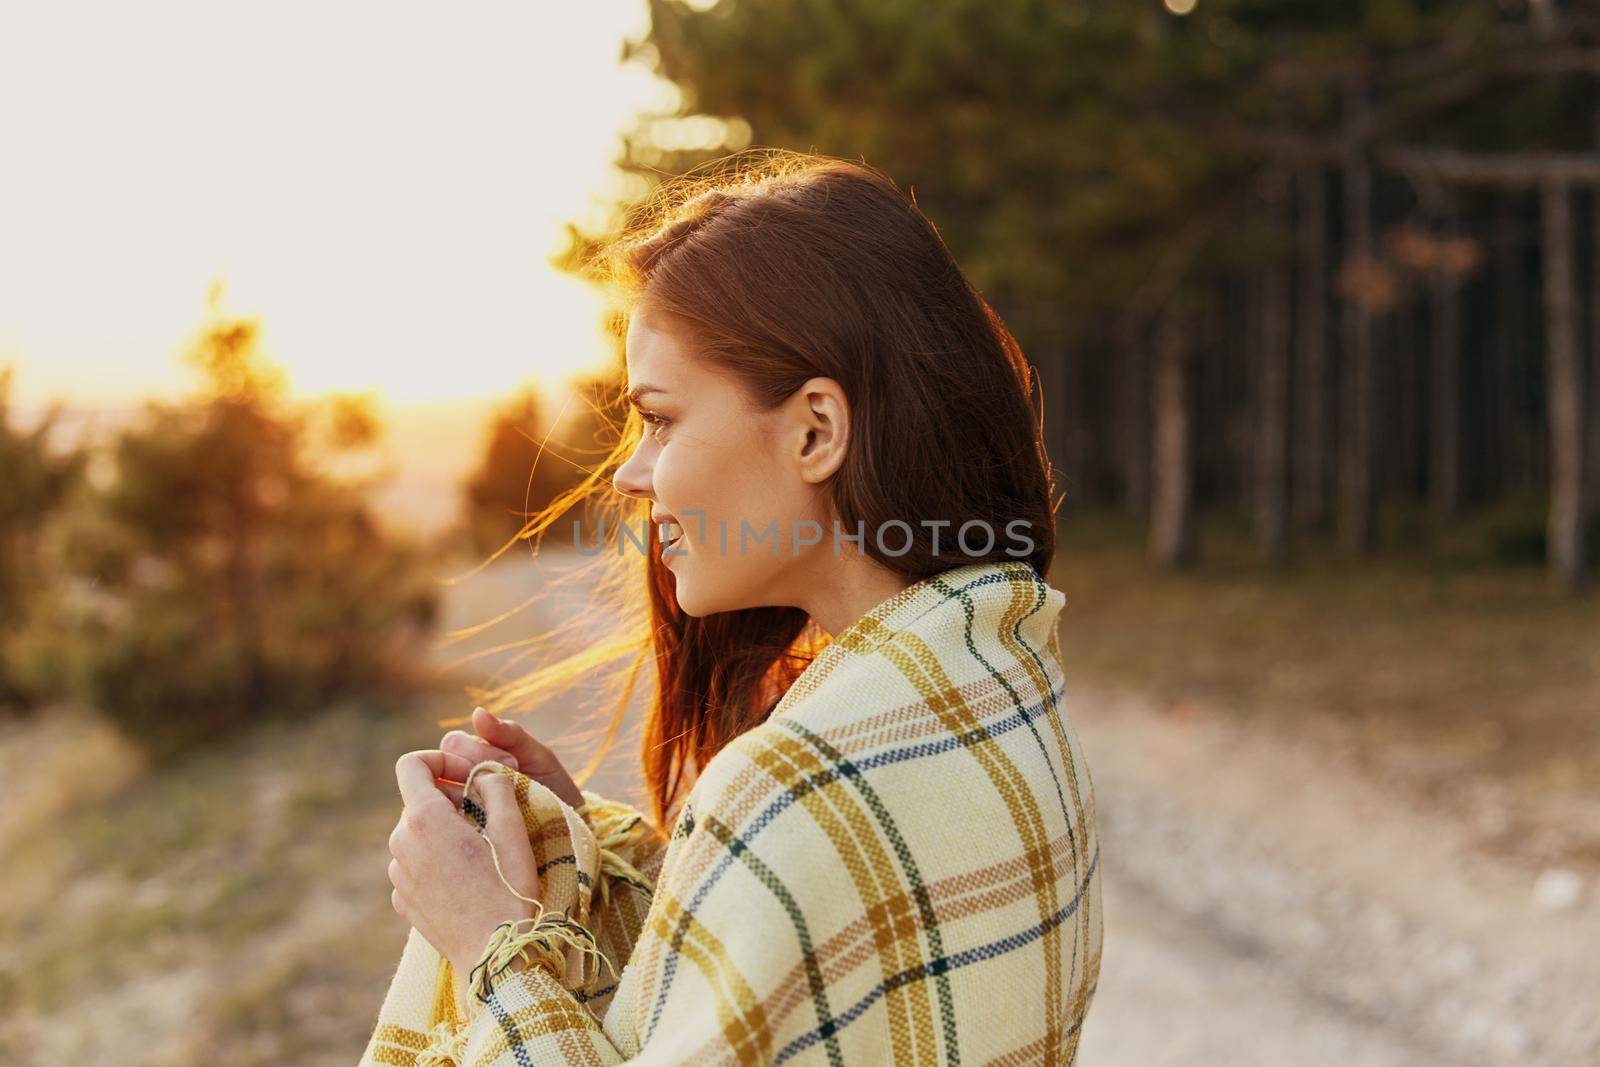 Joyful traveler on a path in the forest with a plaid blanket on her shoulders by SHOTPRIME